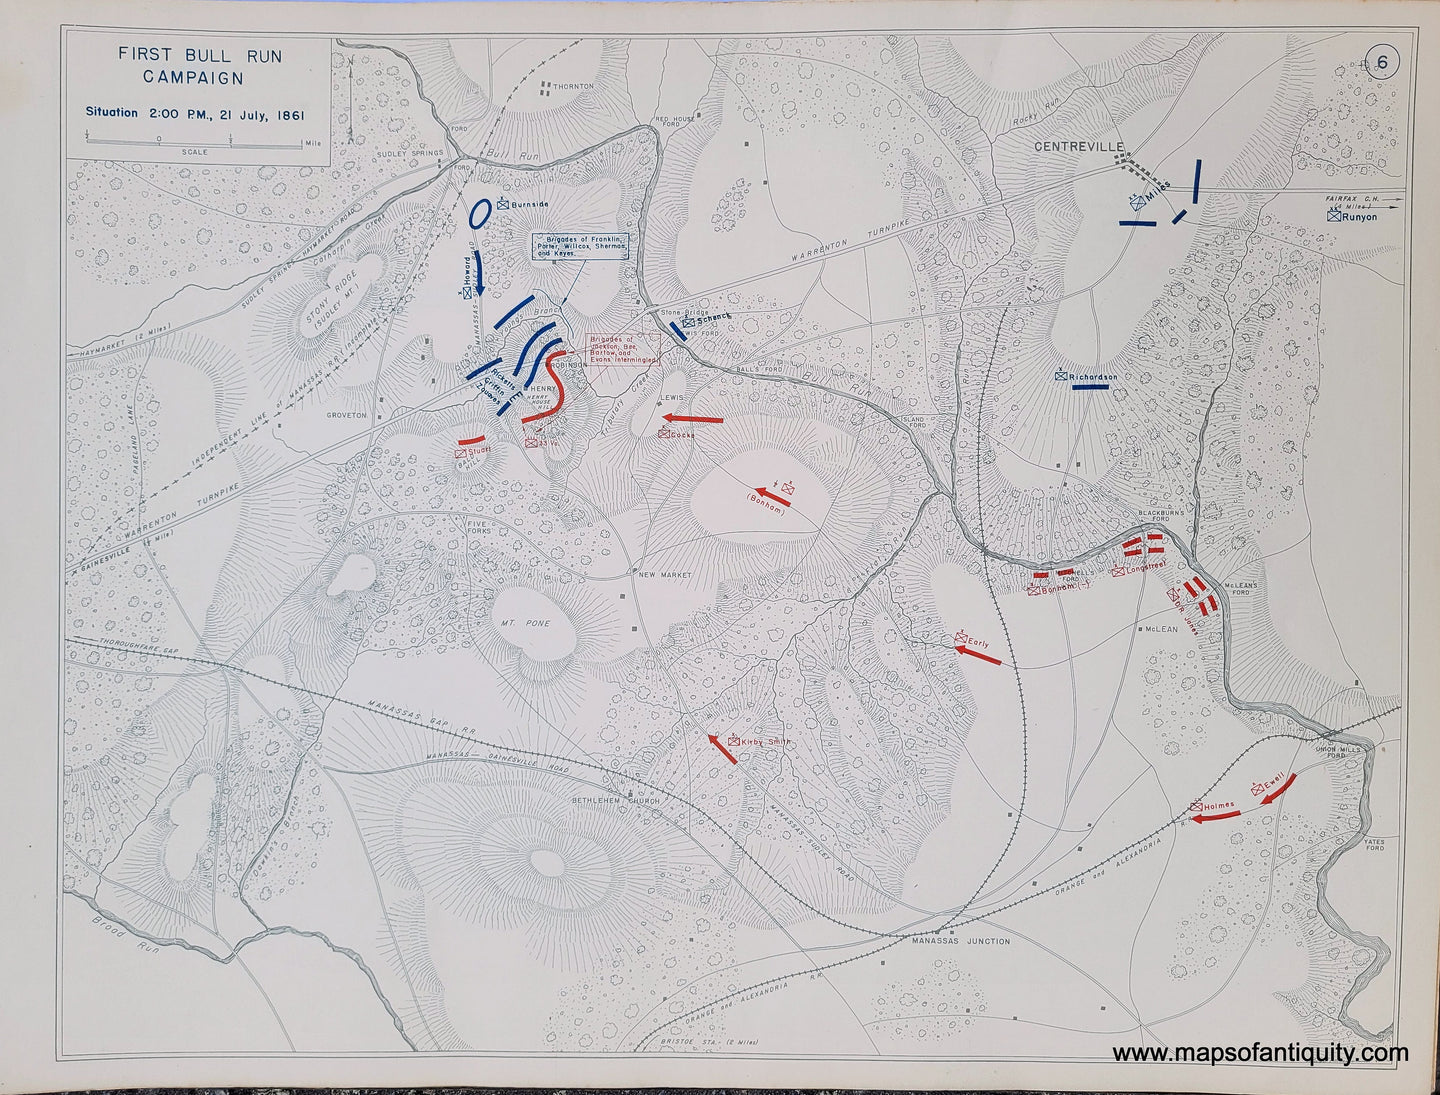 Genuine-Antique-Map-First-Bull-Run-Campaign-Situation-2-00-PM-21-July-1861-1948-Matthew-Forney-Steele-Dept-of-Military-Art-and-Engineering-US-Military-Academy-West-Point-Maps-Of-Antiquity